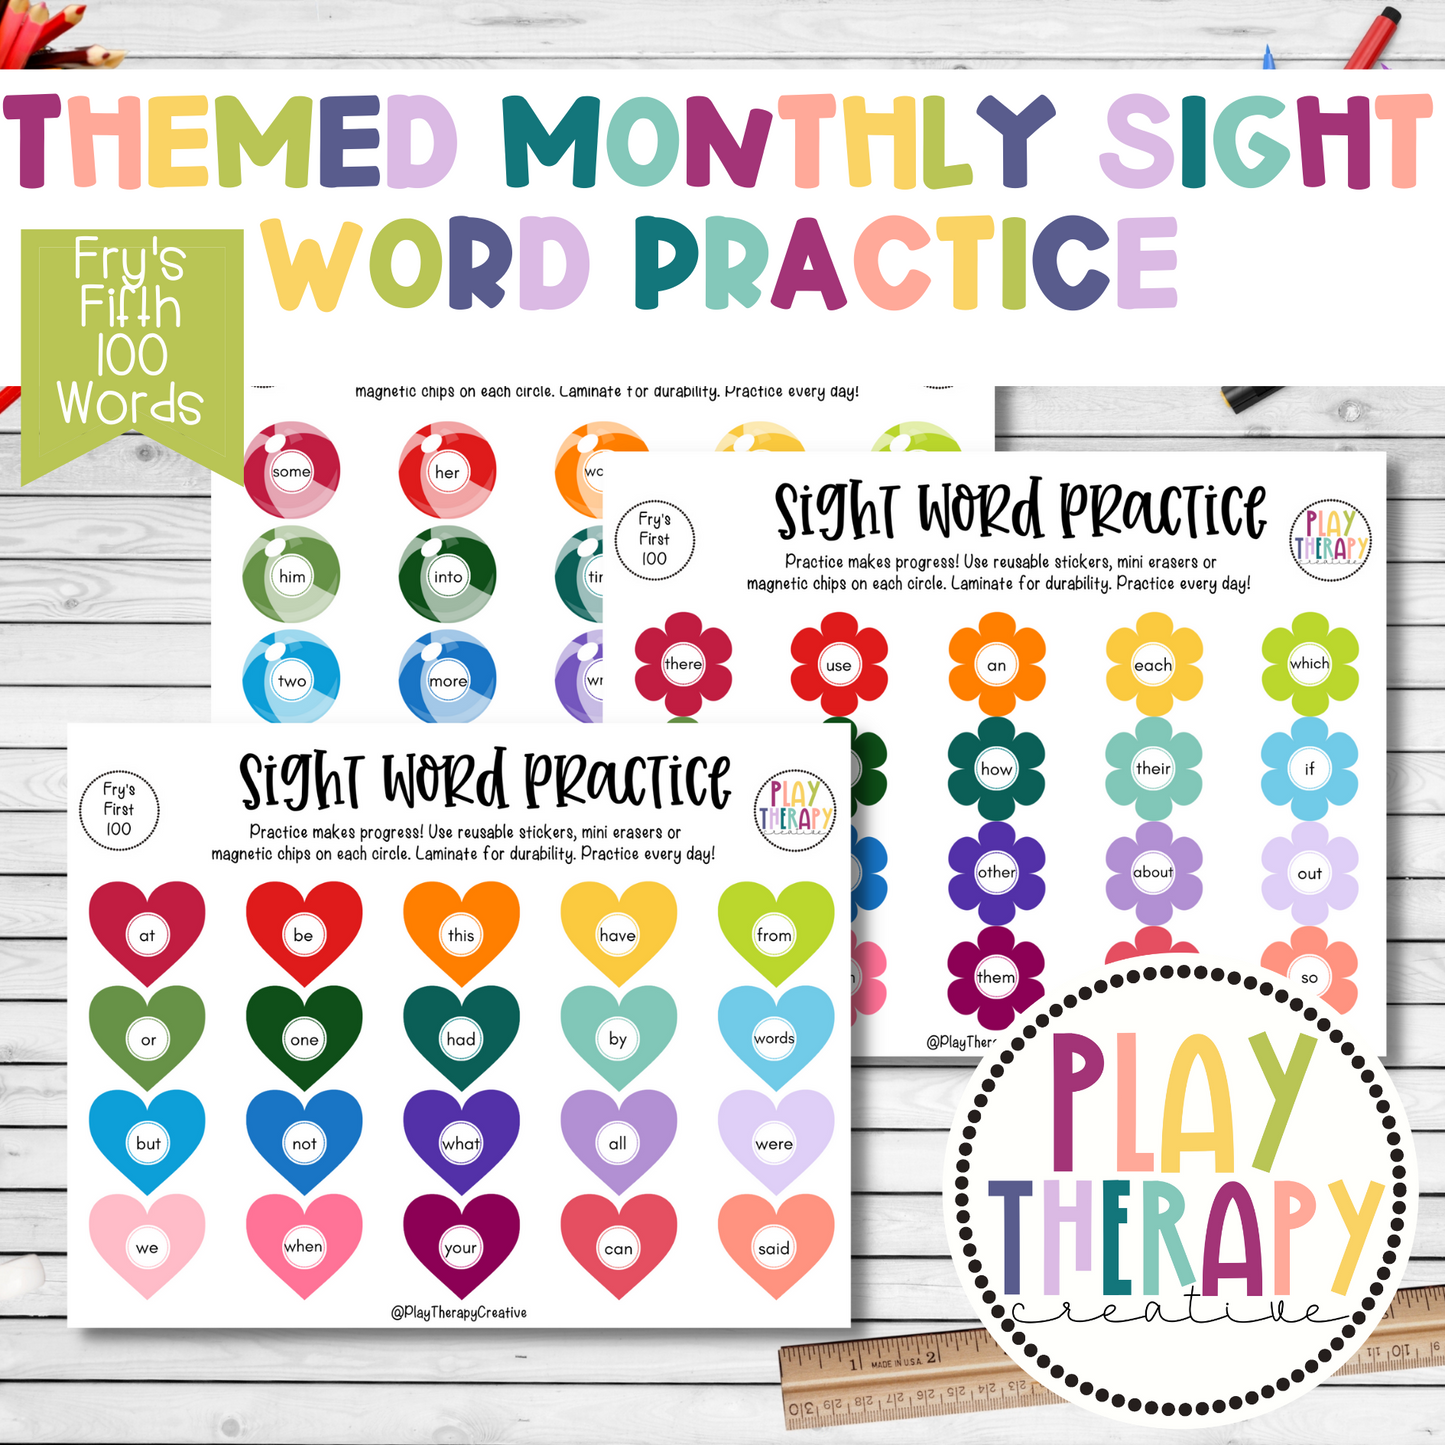 Themed Monthly Sight Word Practice / Fry’s Fifth 100 Sight Words